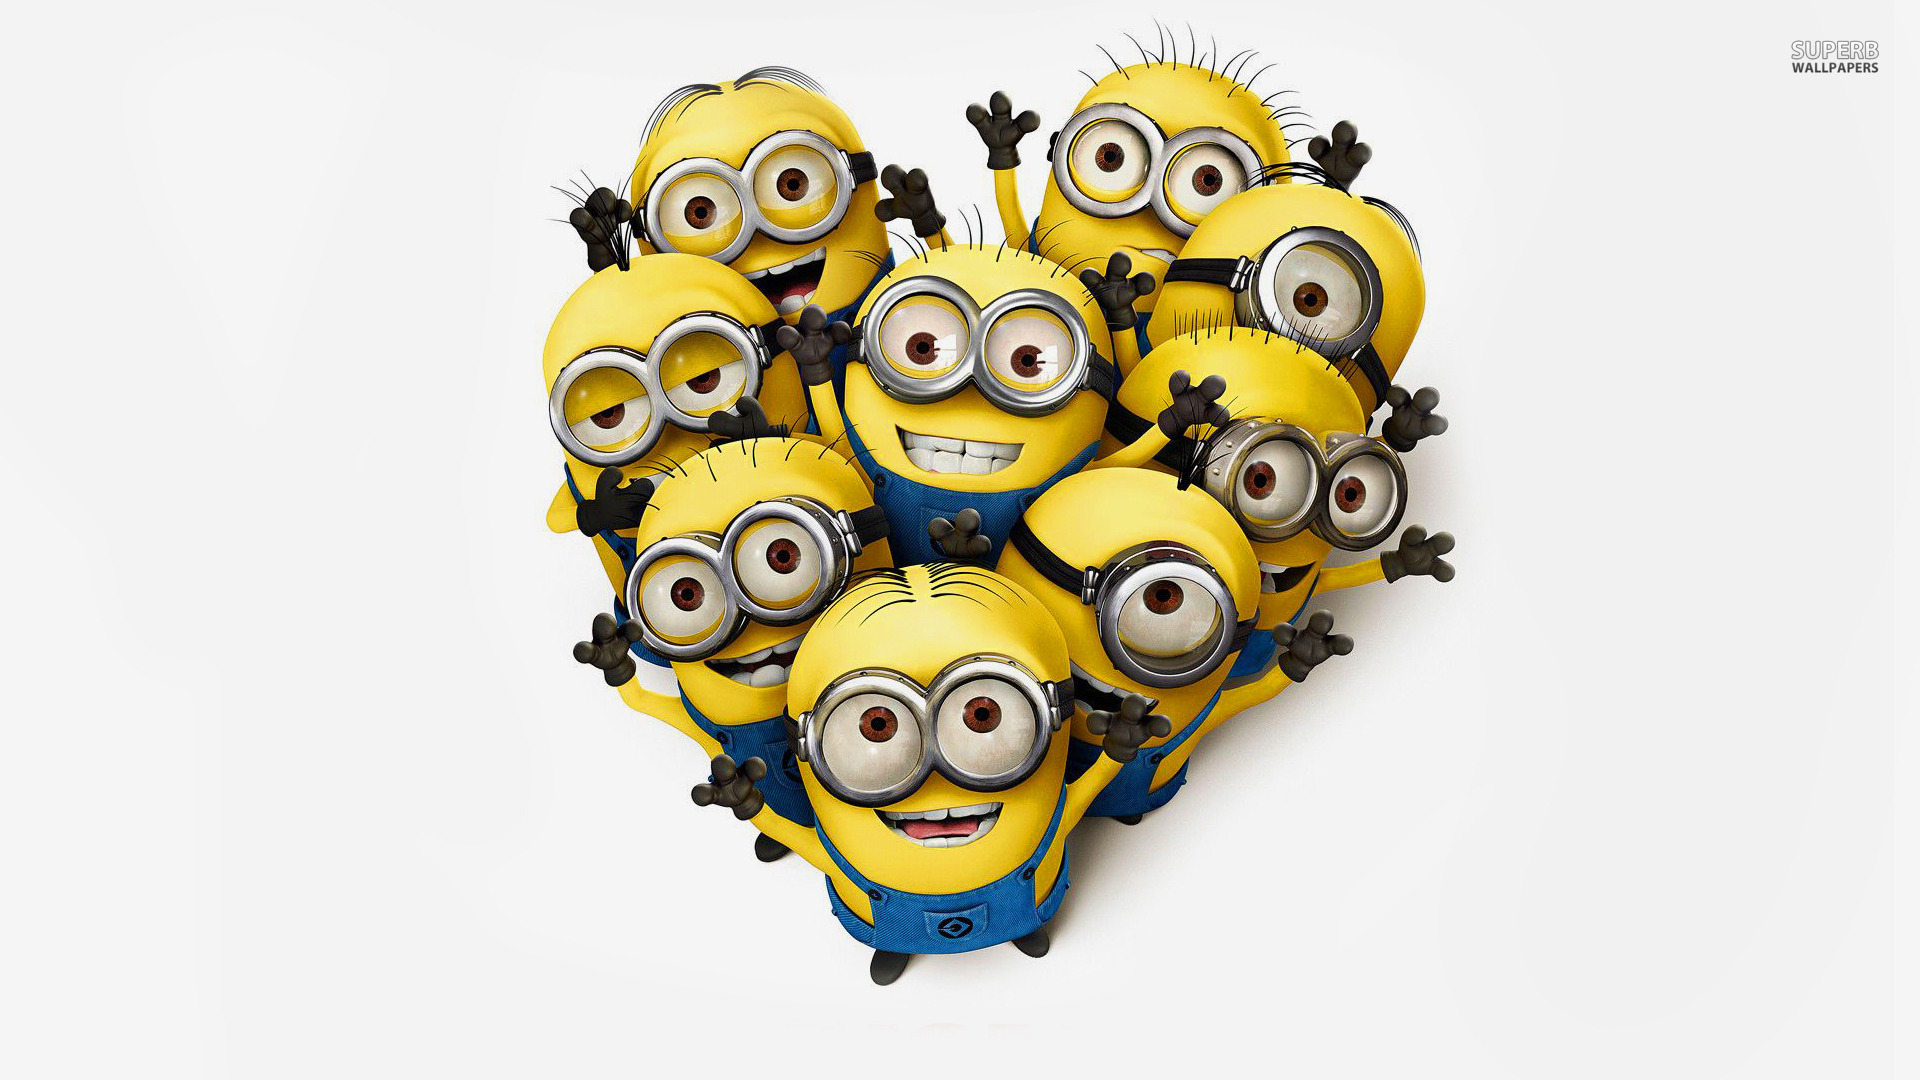 Despicable me 2 hd minions wallpapers for desktop 1920x1080